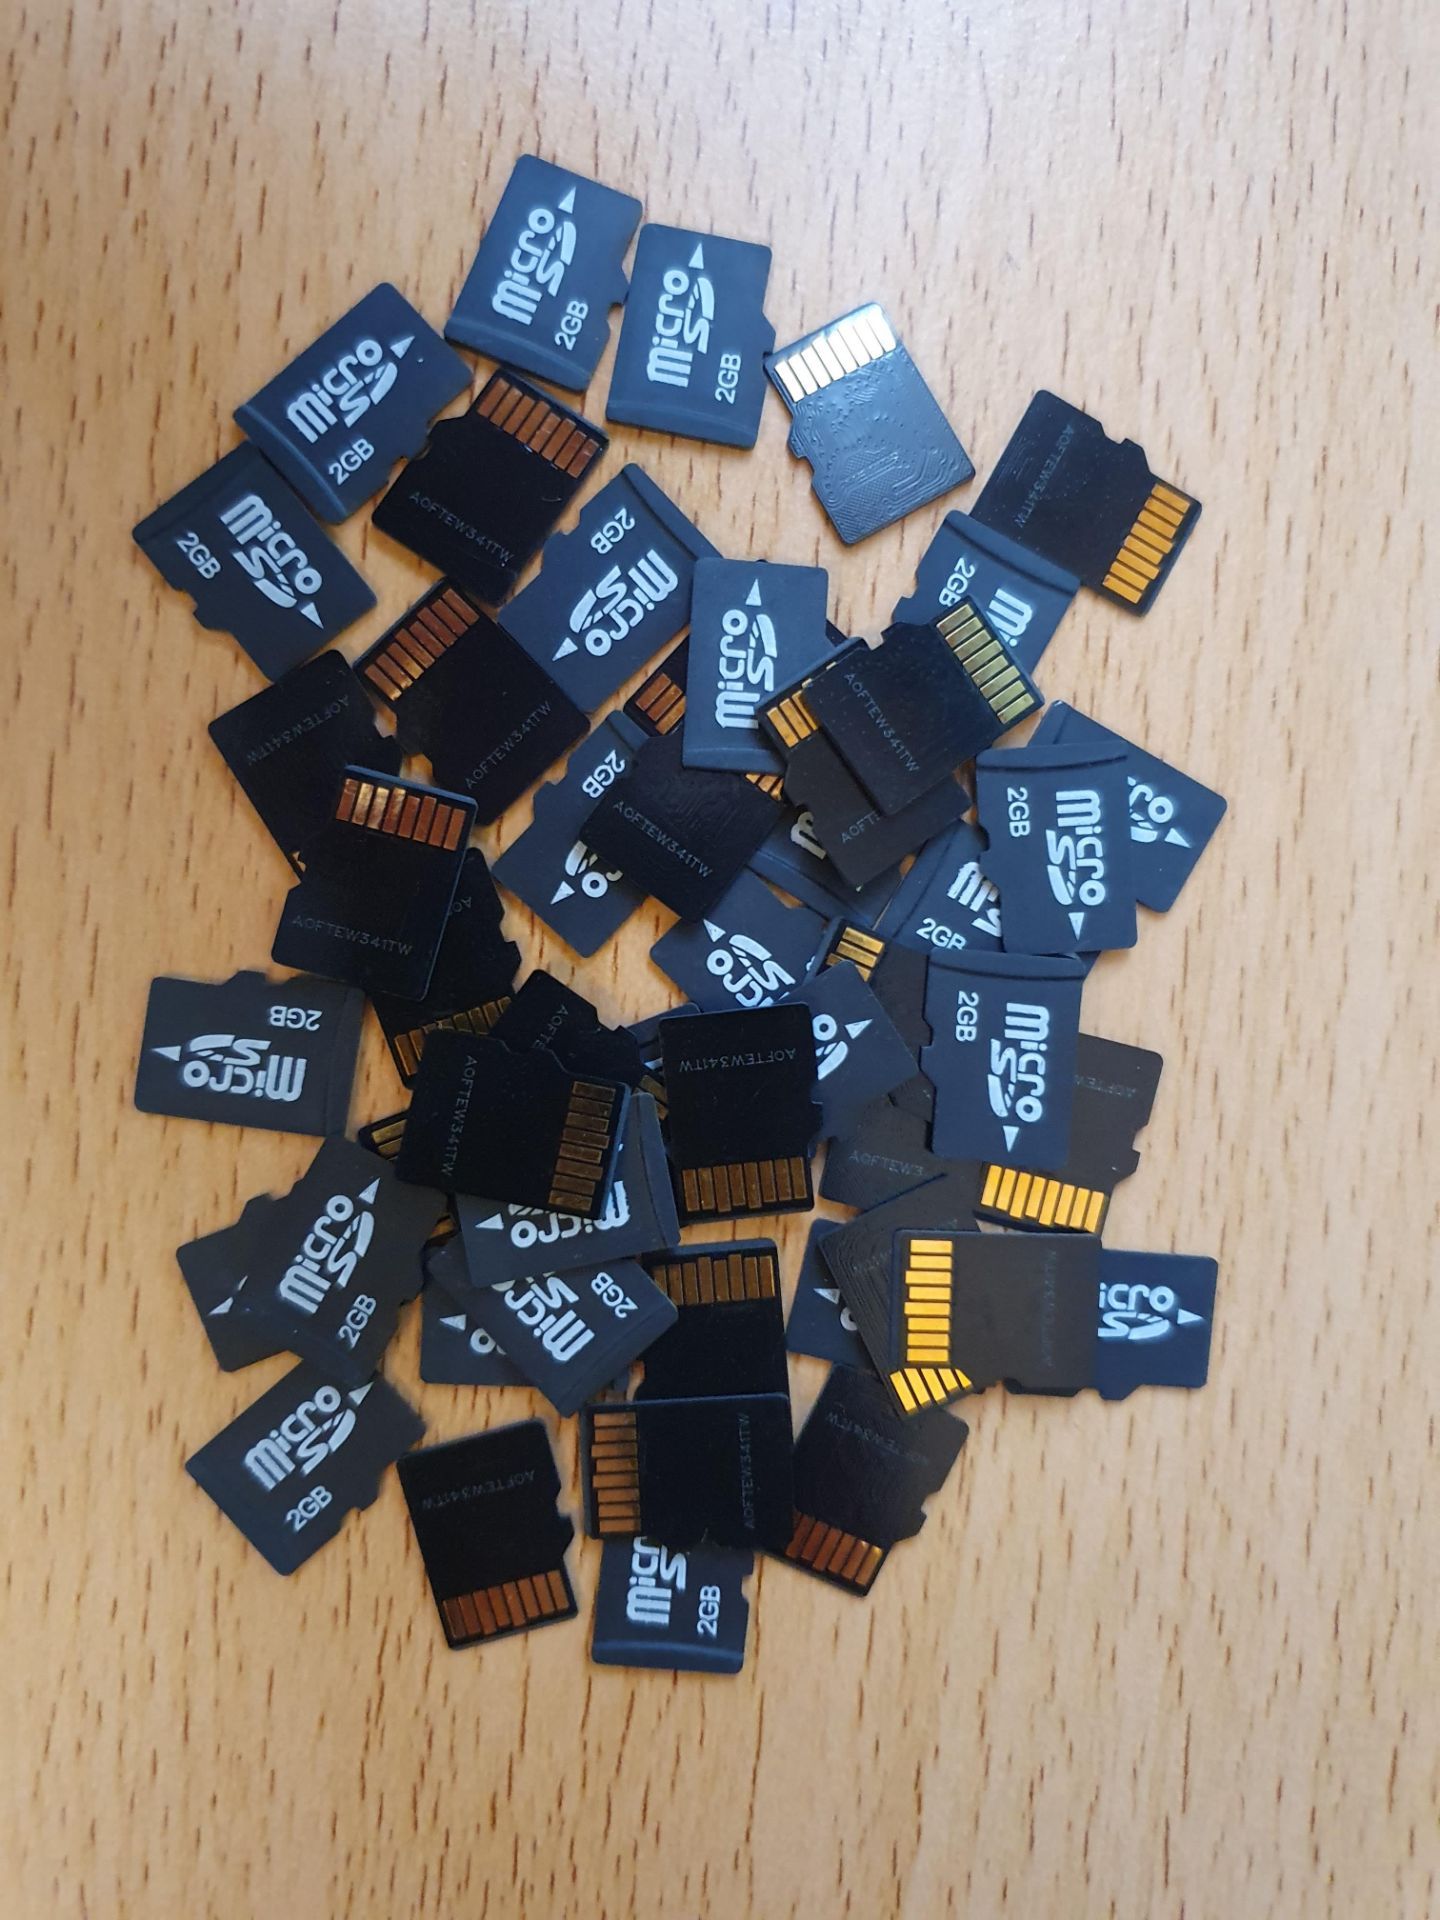 new 50 x 2gb micro sd cards